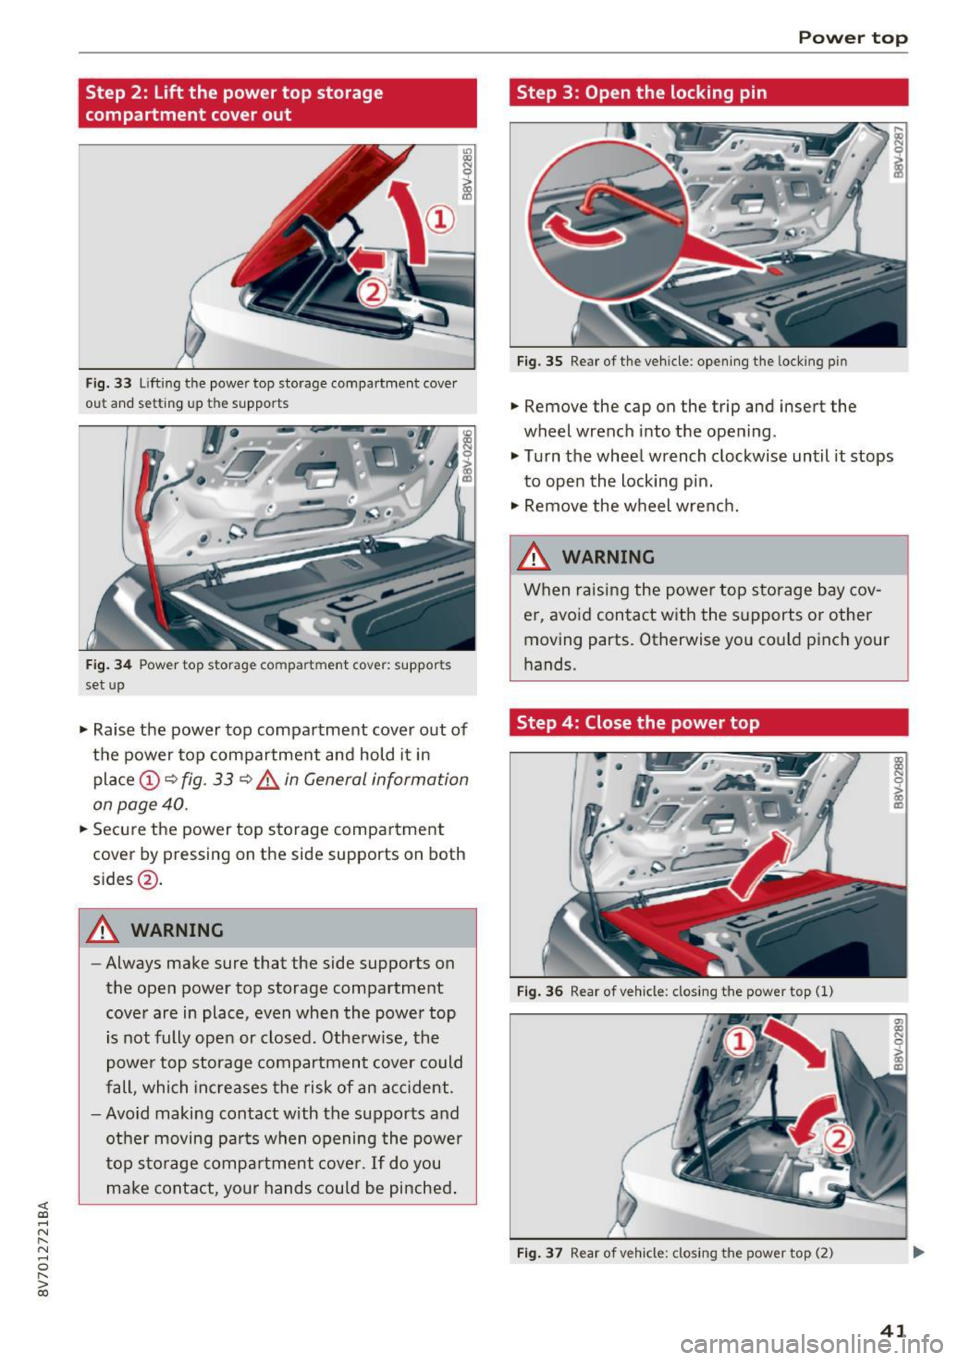 AUDI A3 CABRIOLET 2016 Service Manual <( co ..... N 
" N ..... 0 r--. > 00 
Step  2:  Lift the  power  top  storage 
compartment  cover out 
Fig. 33 Lifting the  power top storage  compartment  cover 
out  and  setting  up the  supports 
